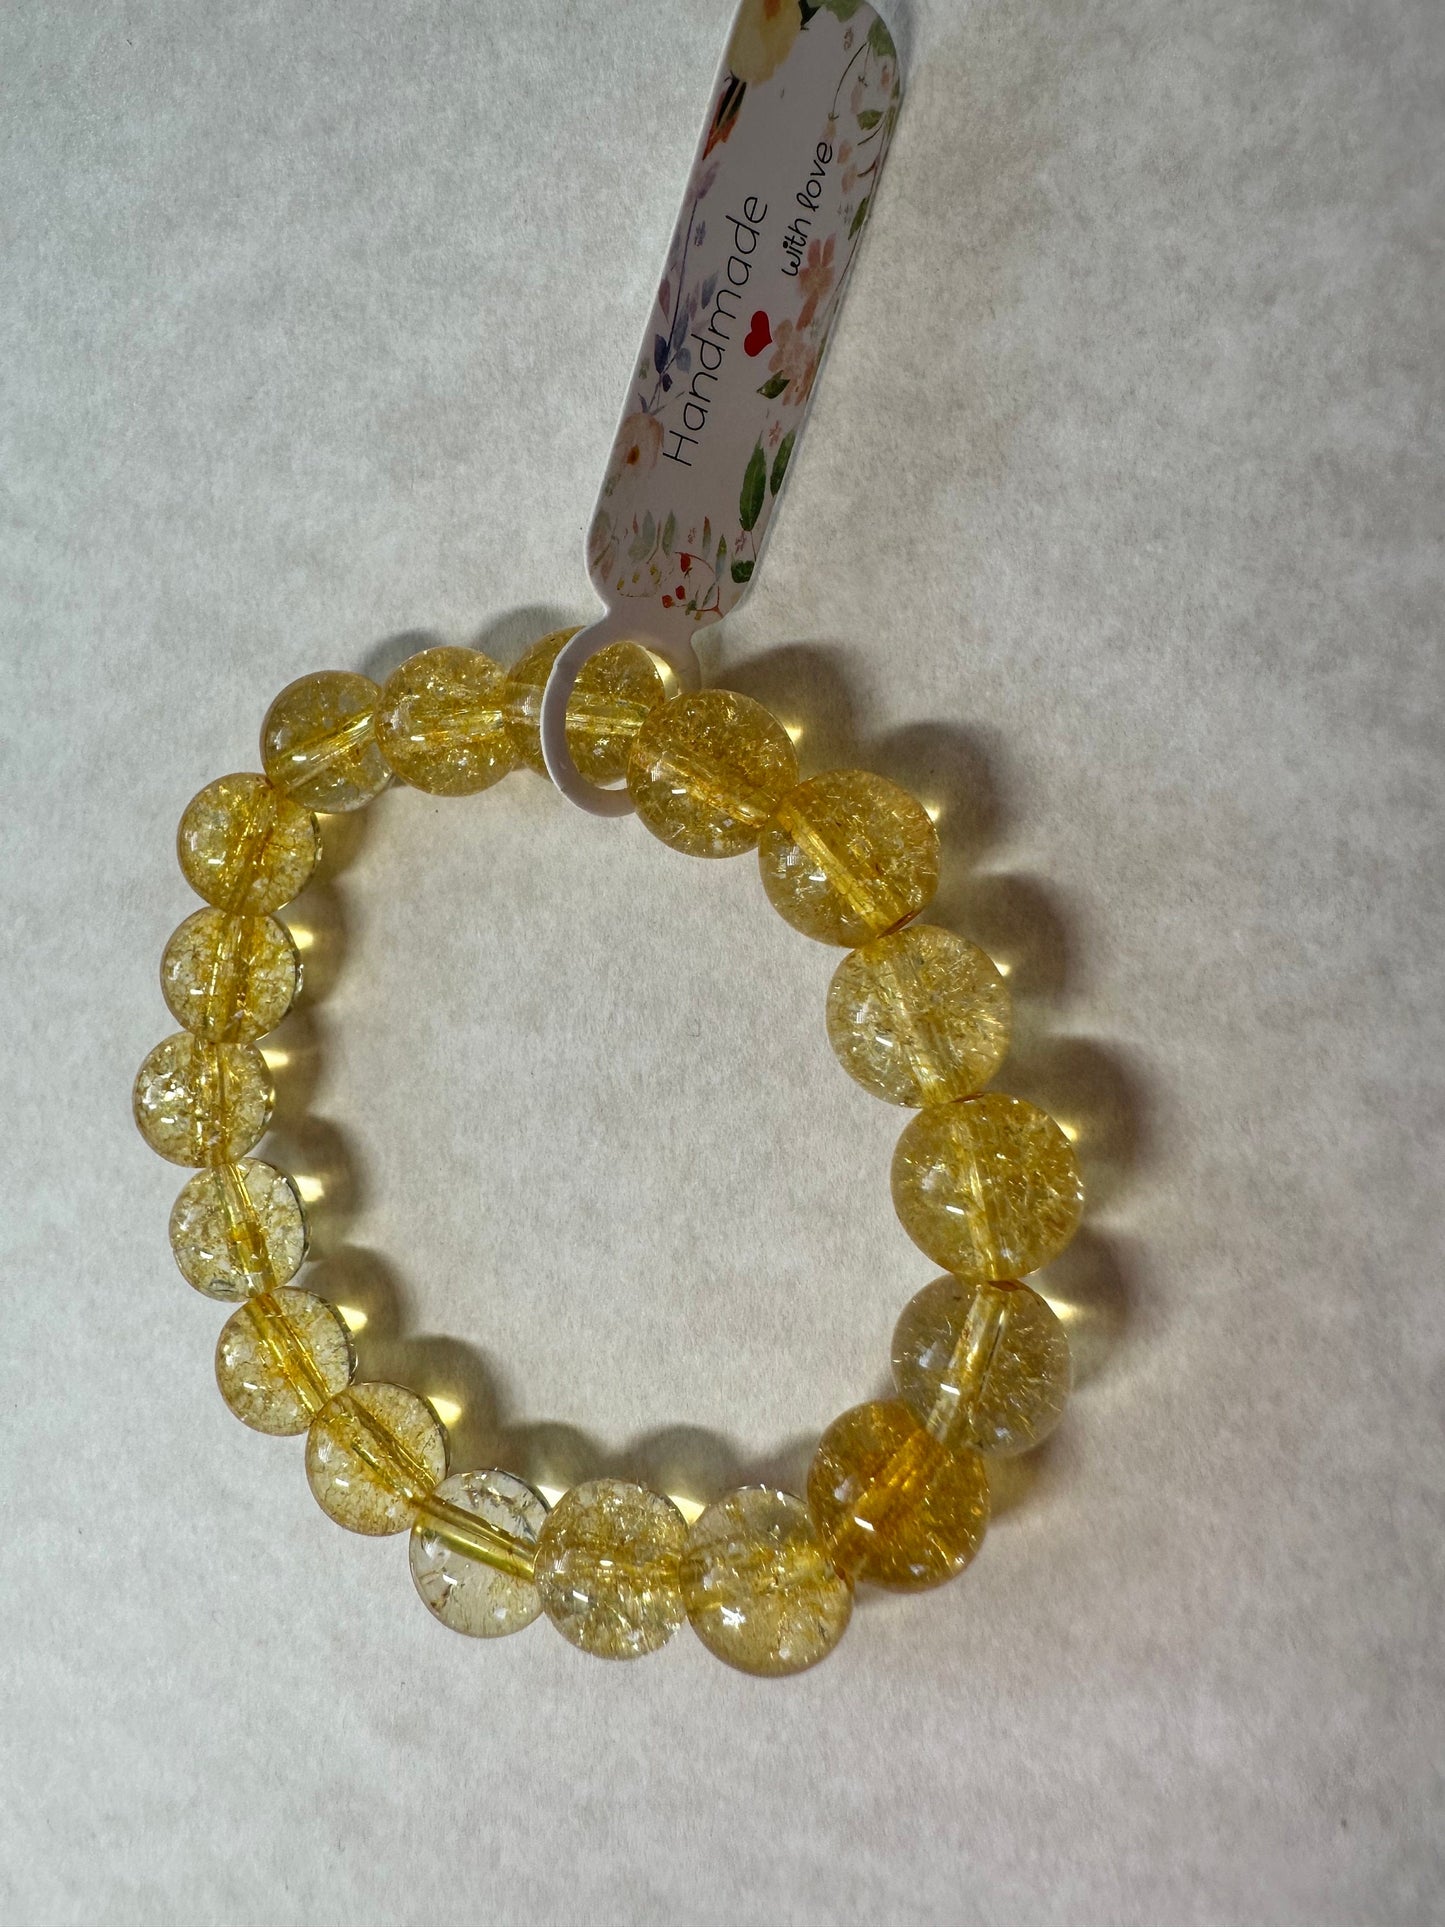 10M Citrine Gemstone Yellow Beaded Bracelet on a string bracelet, adjustable and one size fits most, handmade, girl or guys gift.